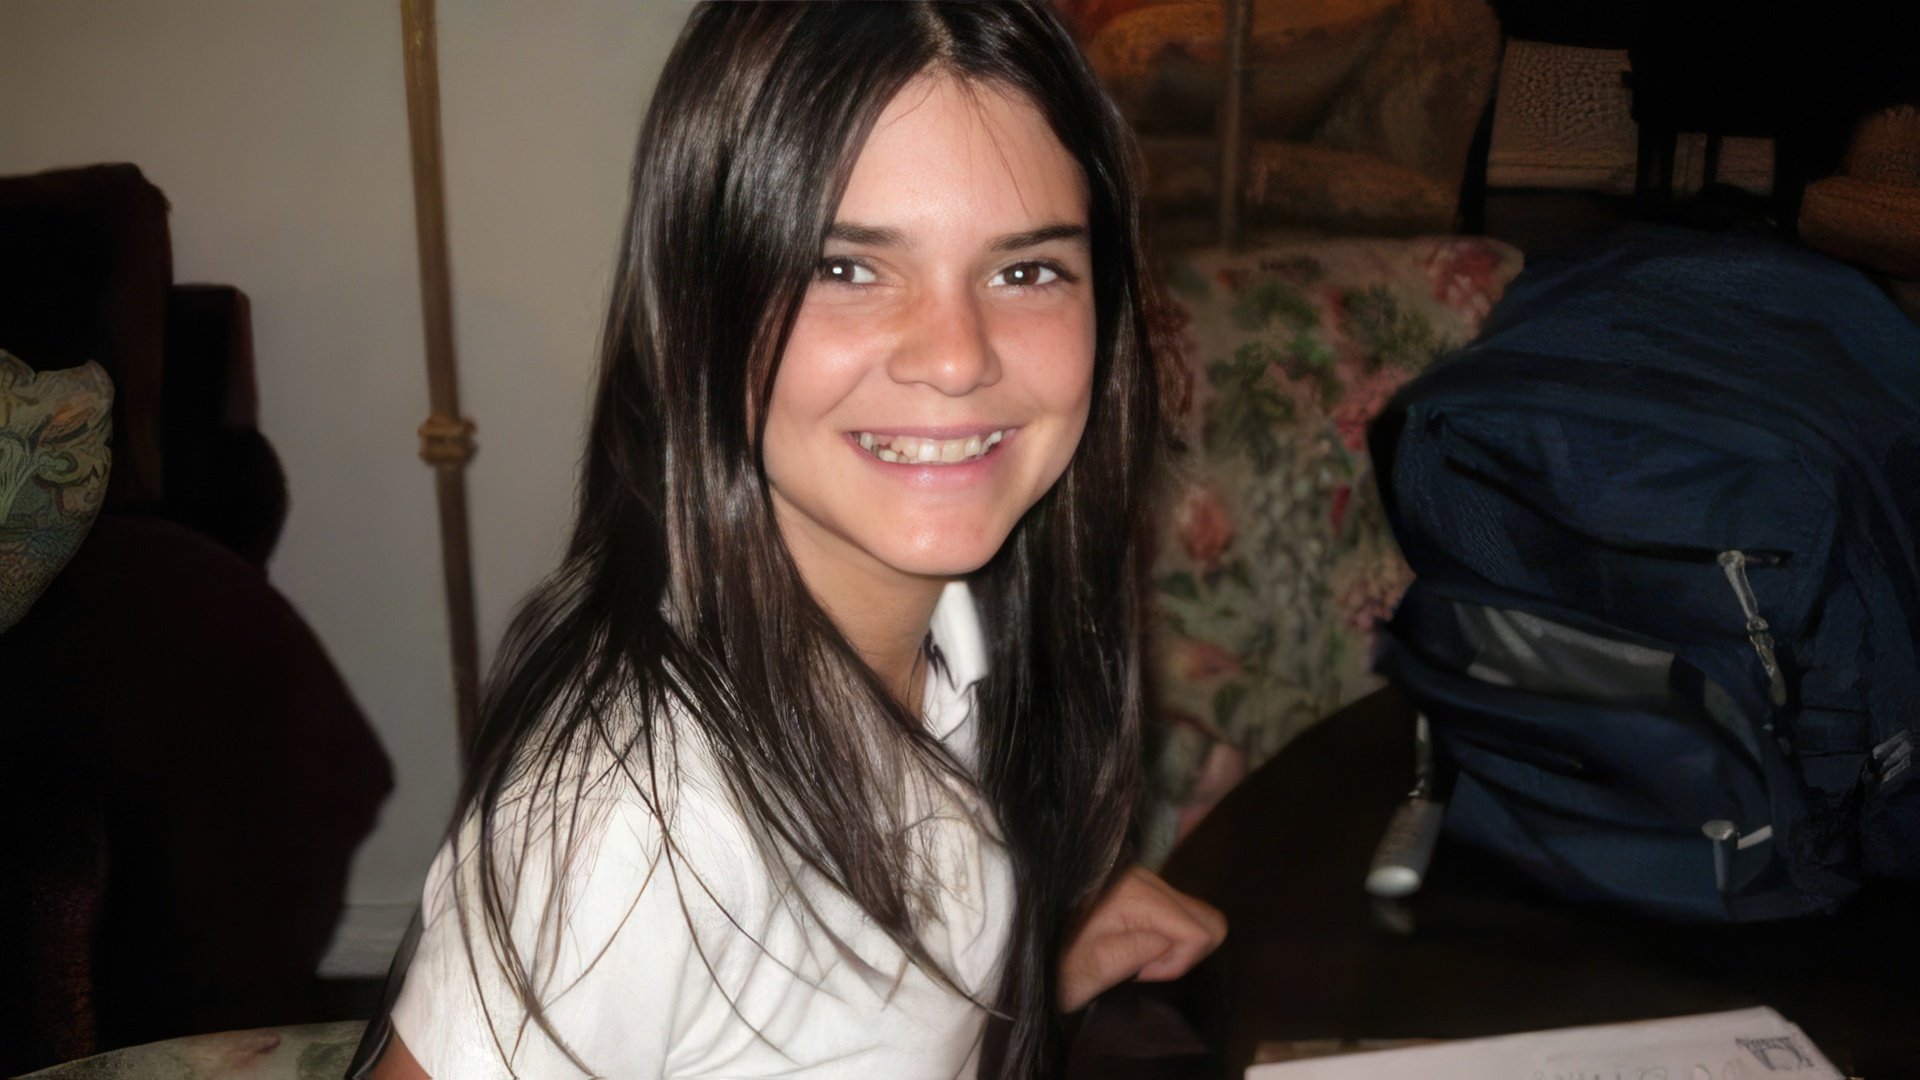 Kendall Jenner as a child